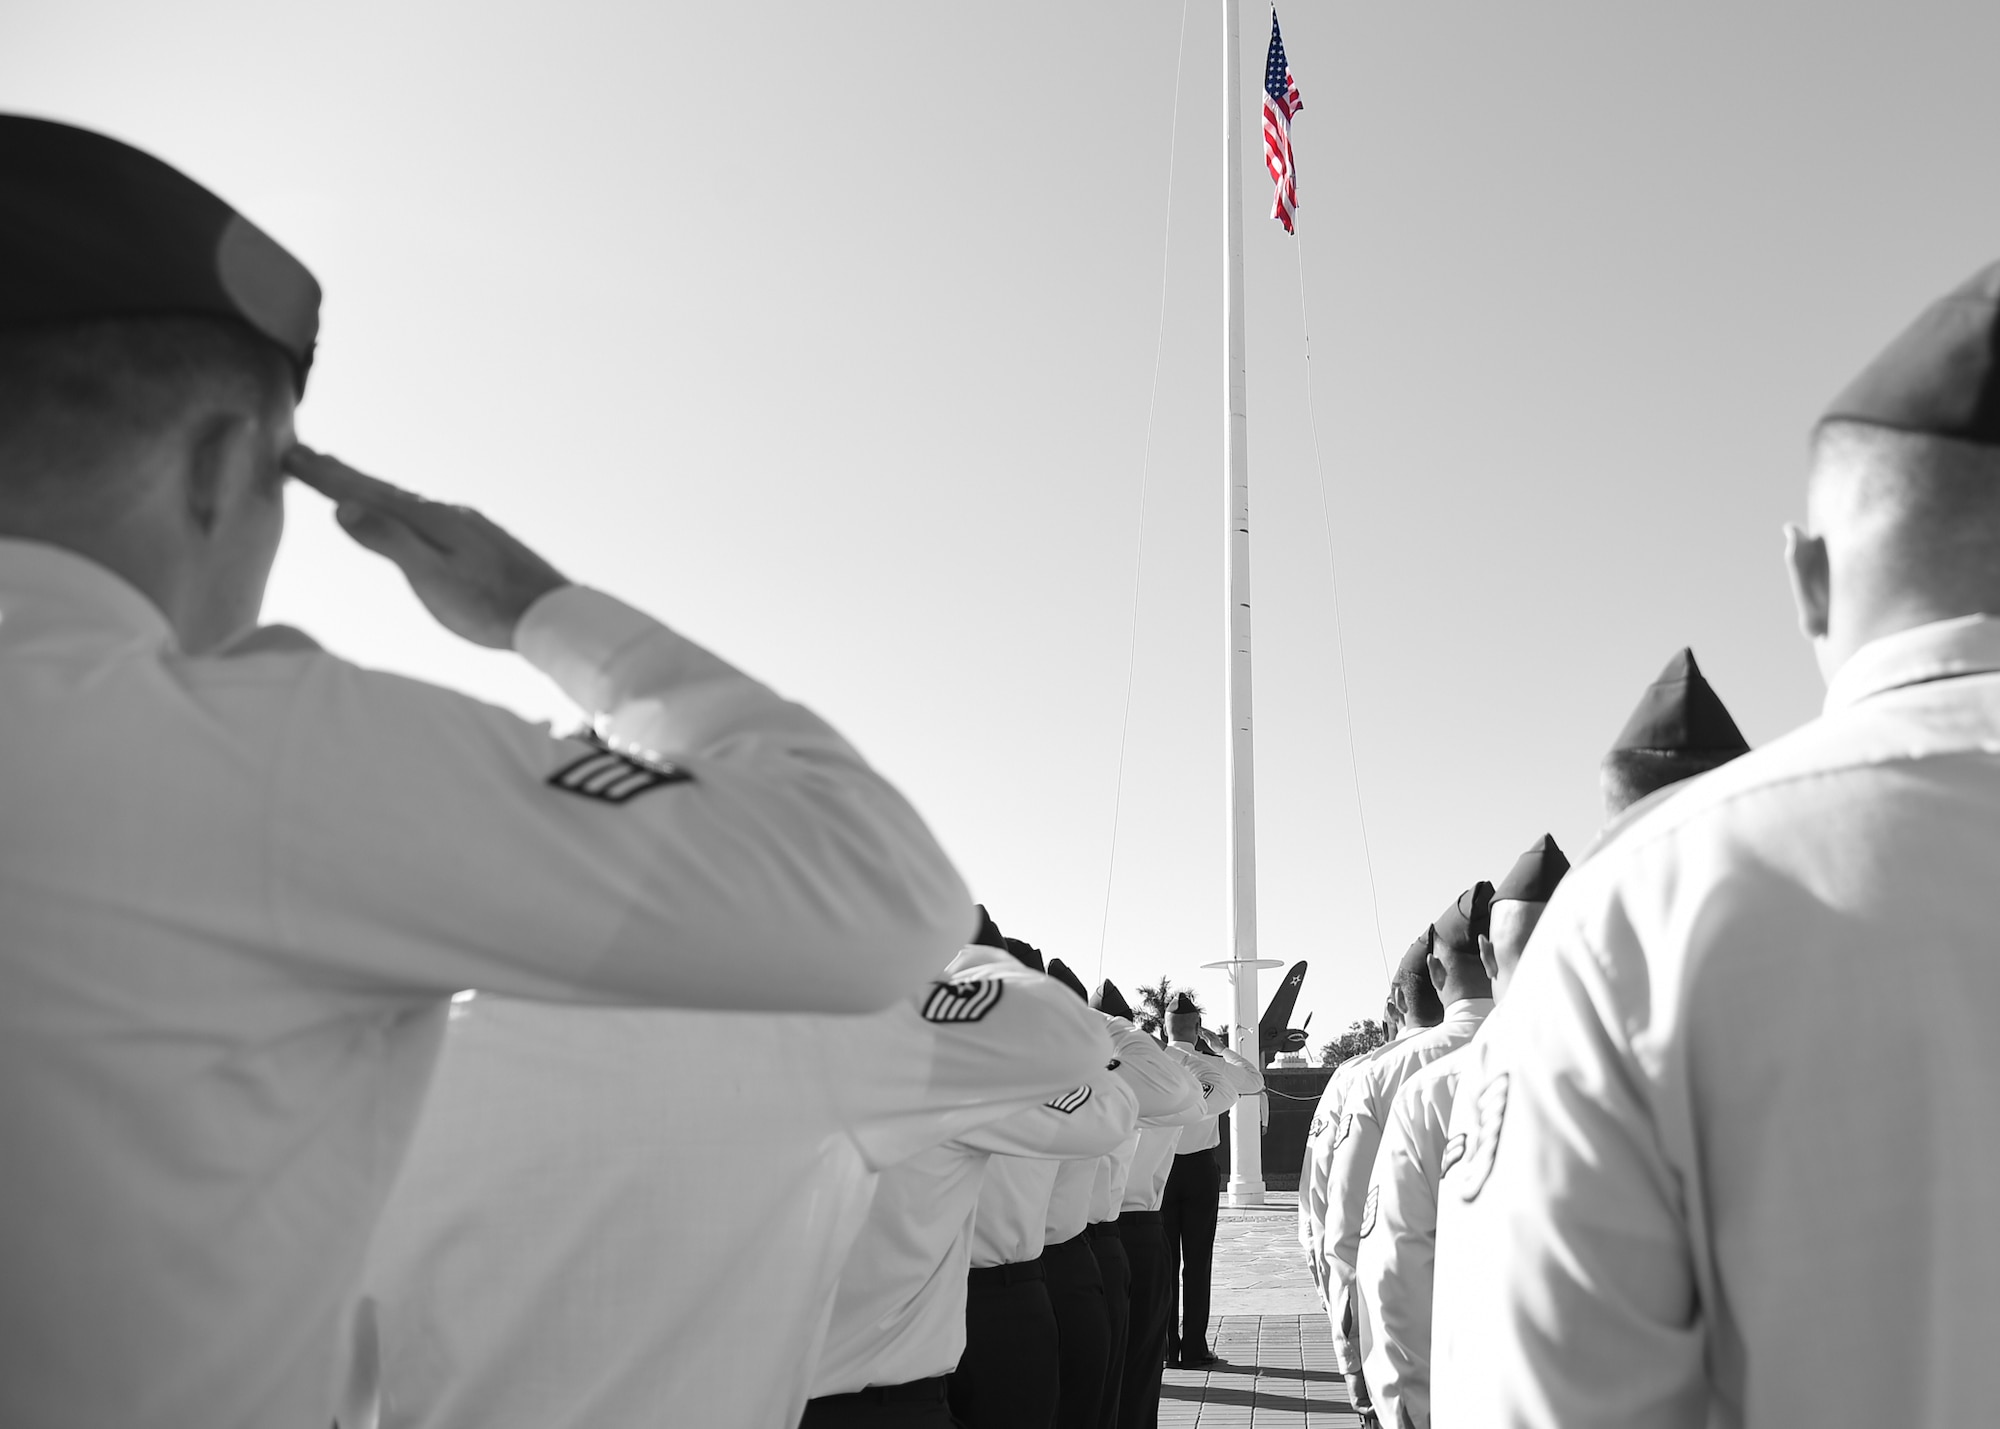 Members of the 747th Communications Squadron salute the U.S. flag during a Reveille ceremony on Joint Base Pearl Harbor-Hickam, Hawaii, July 2, 2015.The ceremony was performed by 60 Airmen from the 747th in honor of Independence Day. (U.S. Air Force illustration by Tech. Sgt. Aaron Oelrich/Released) 
